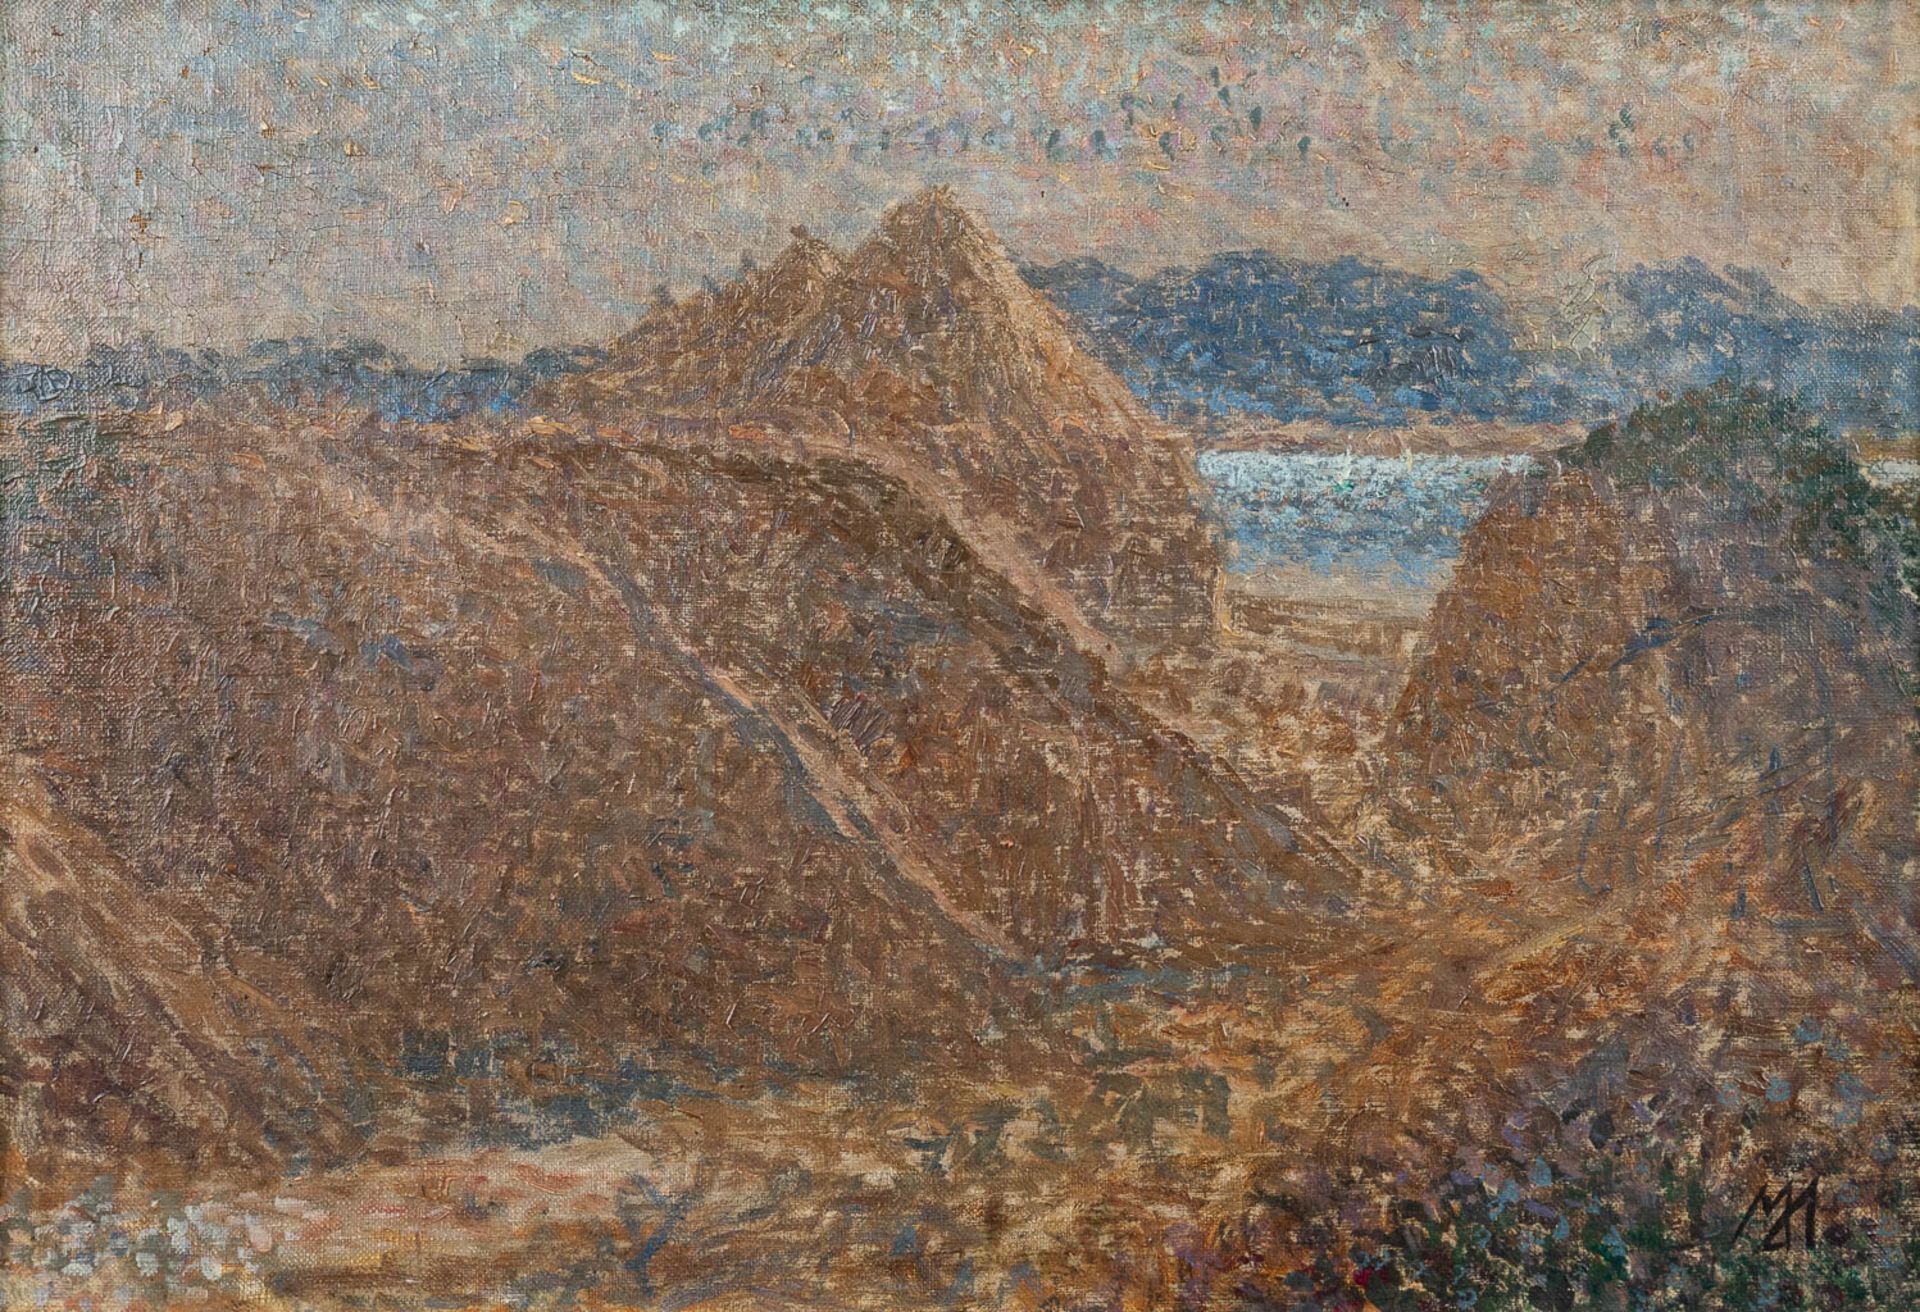 Modest HUYS (1874/75-1932) 'View of the Leie with haystacks' oil on canvas. (43 x 30cm)